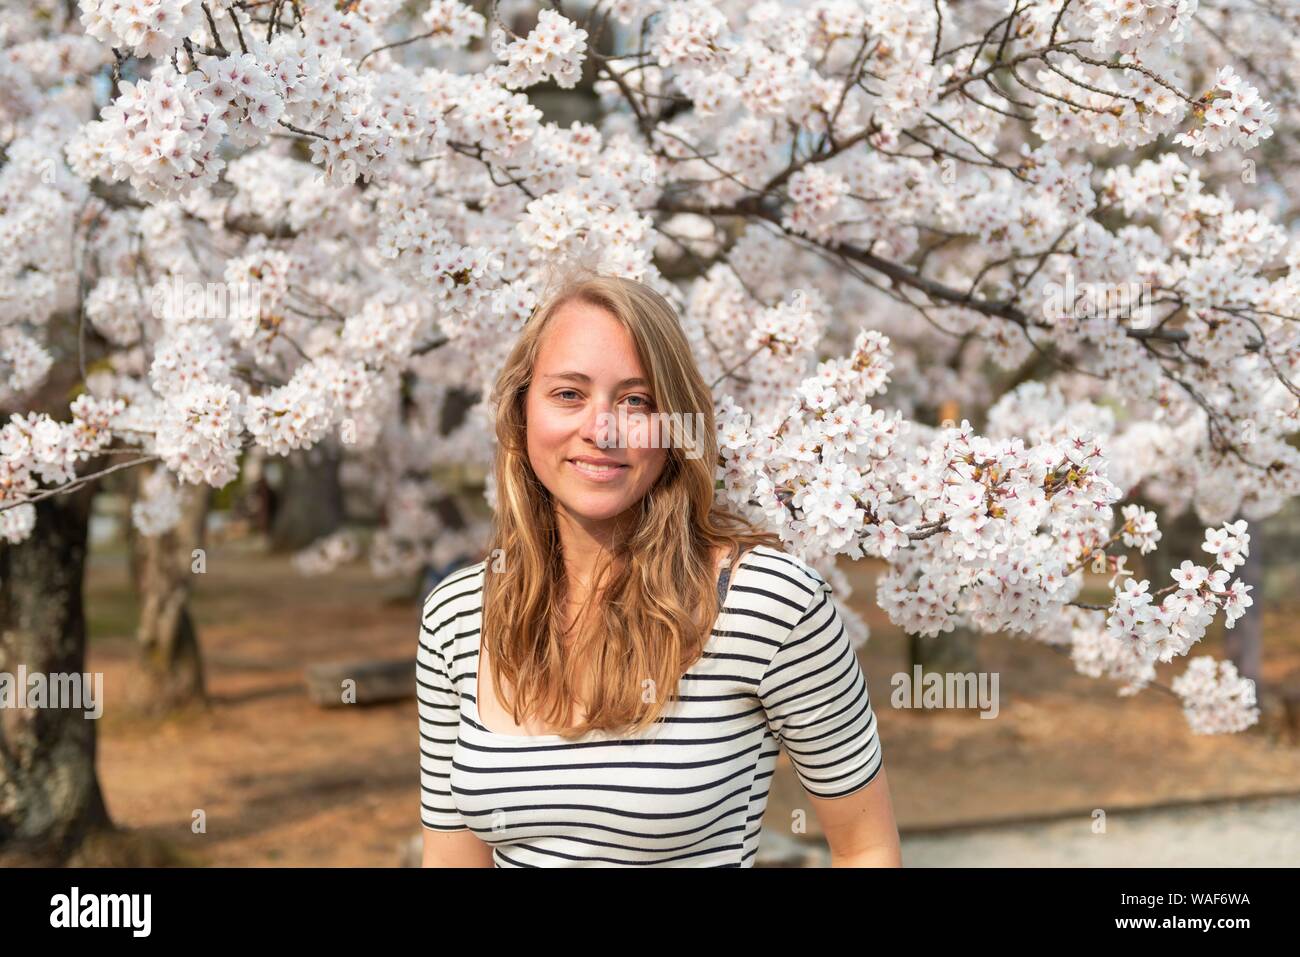 Tourist, young woman between blossoming cherry blossoms, Japanese cherry blossom in spring, Tokyo, Japan Stock Photo